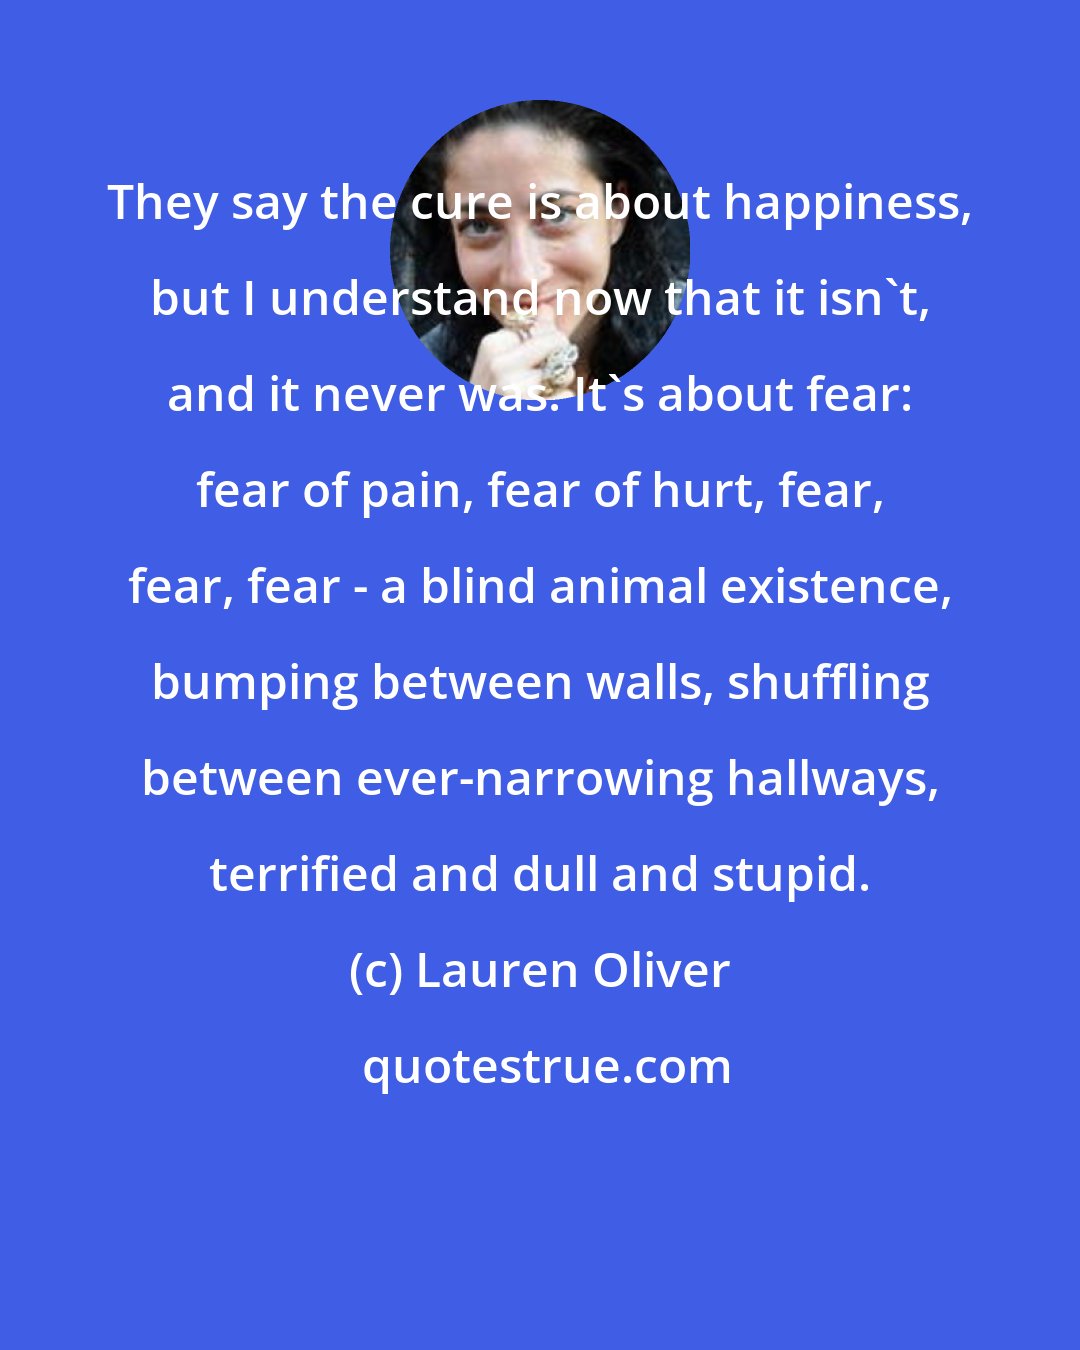 Lauren Oliver: They say the cure is about happiness, but I understand now that it isn't, and it never was. It's about fear: fear of pain, fear of hurt, fear, fear, fear - a blind animal existence, bumping between walls, shuffling between ever-narrowing hallways, terrified and dull and stupid.